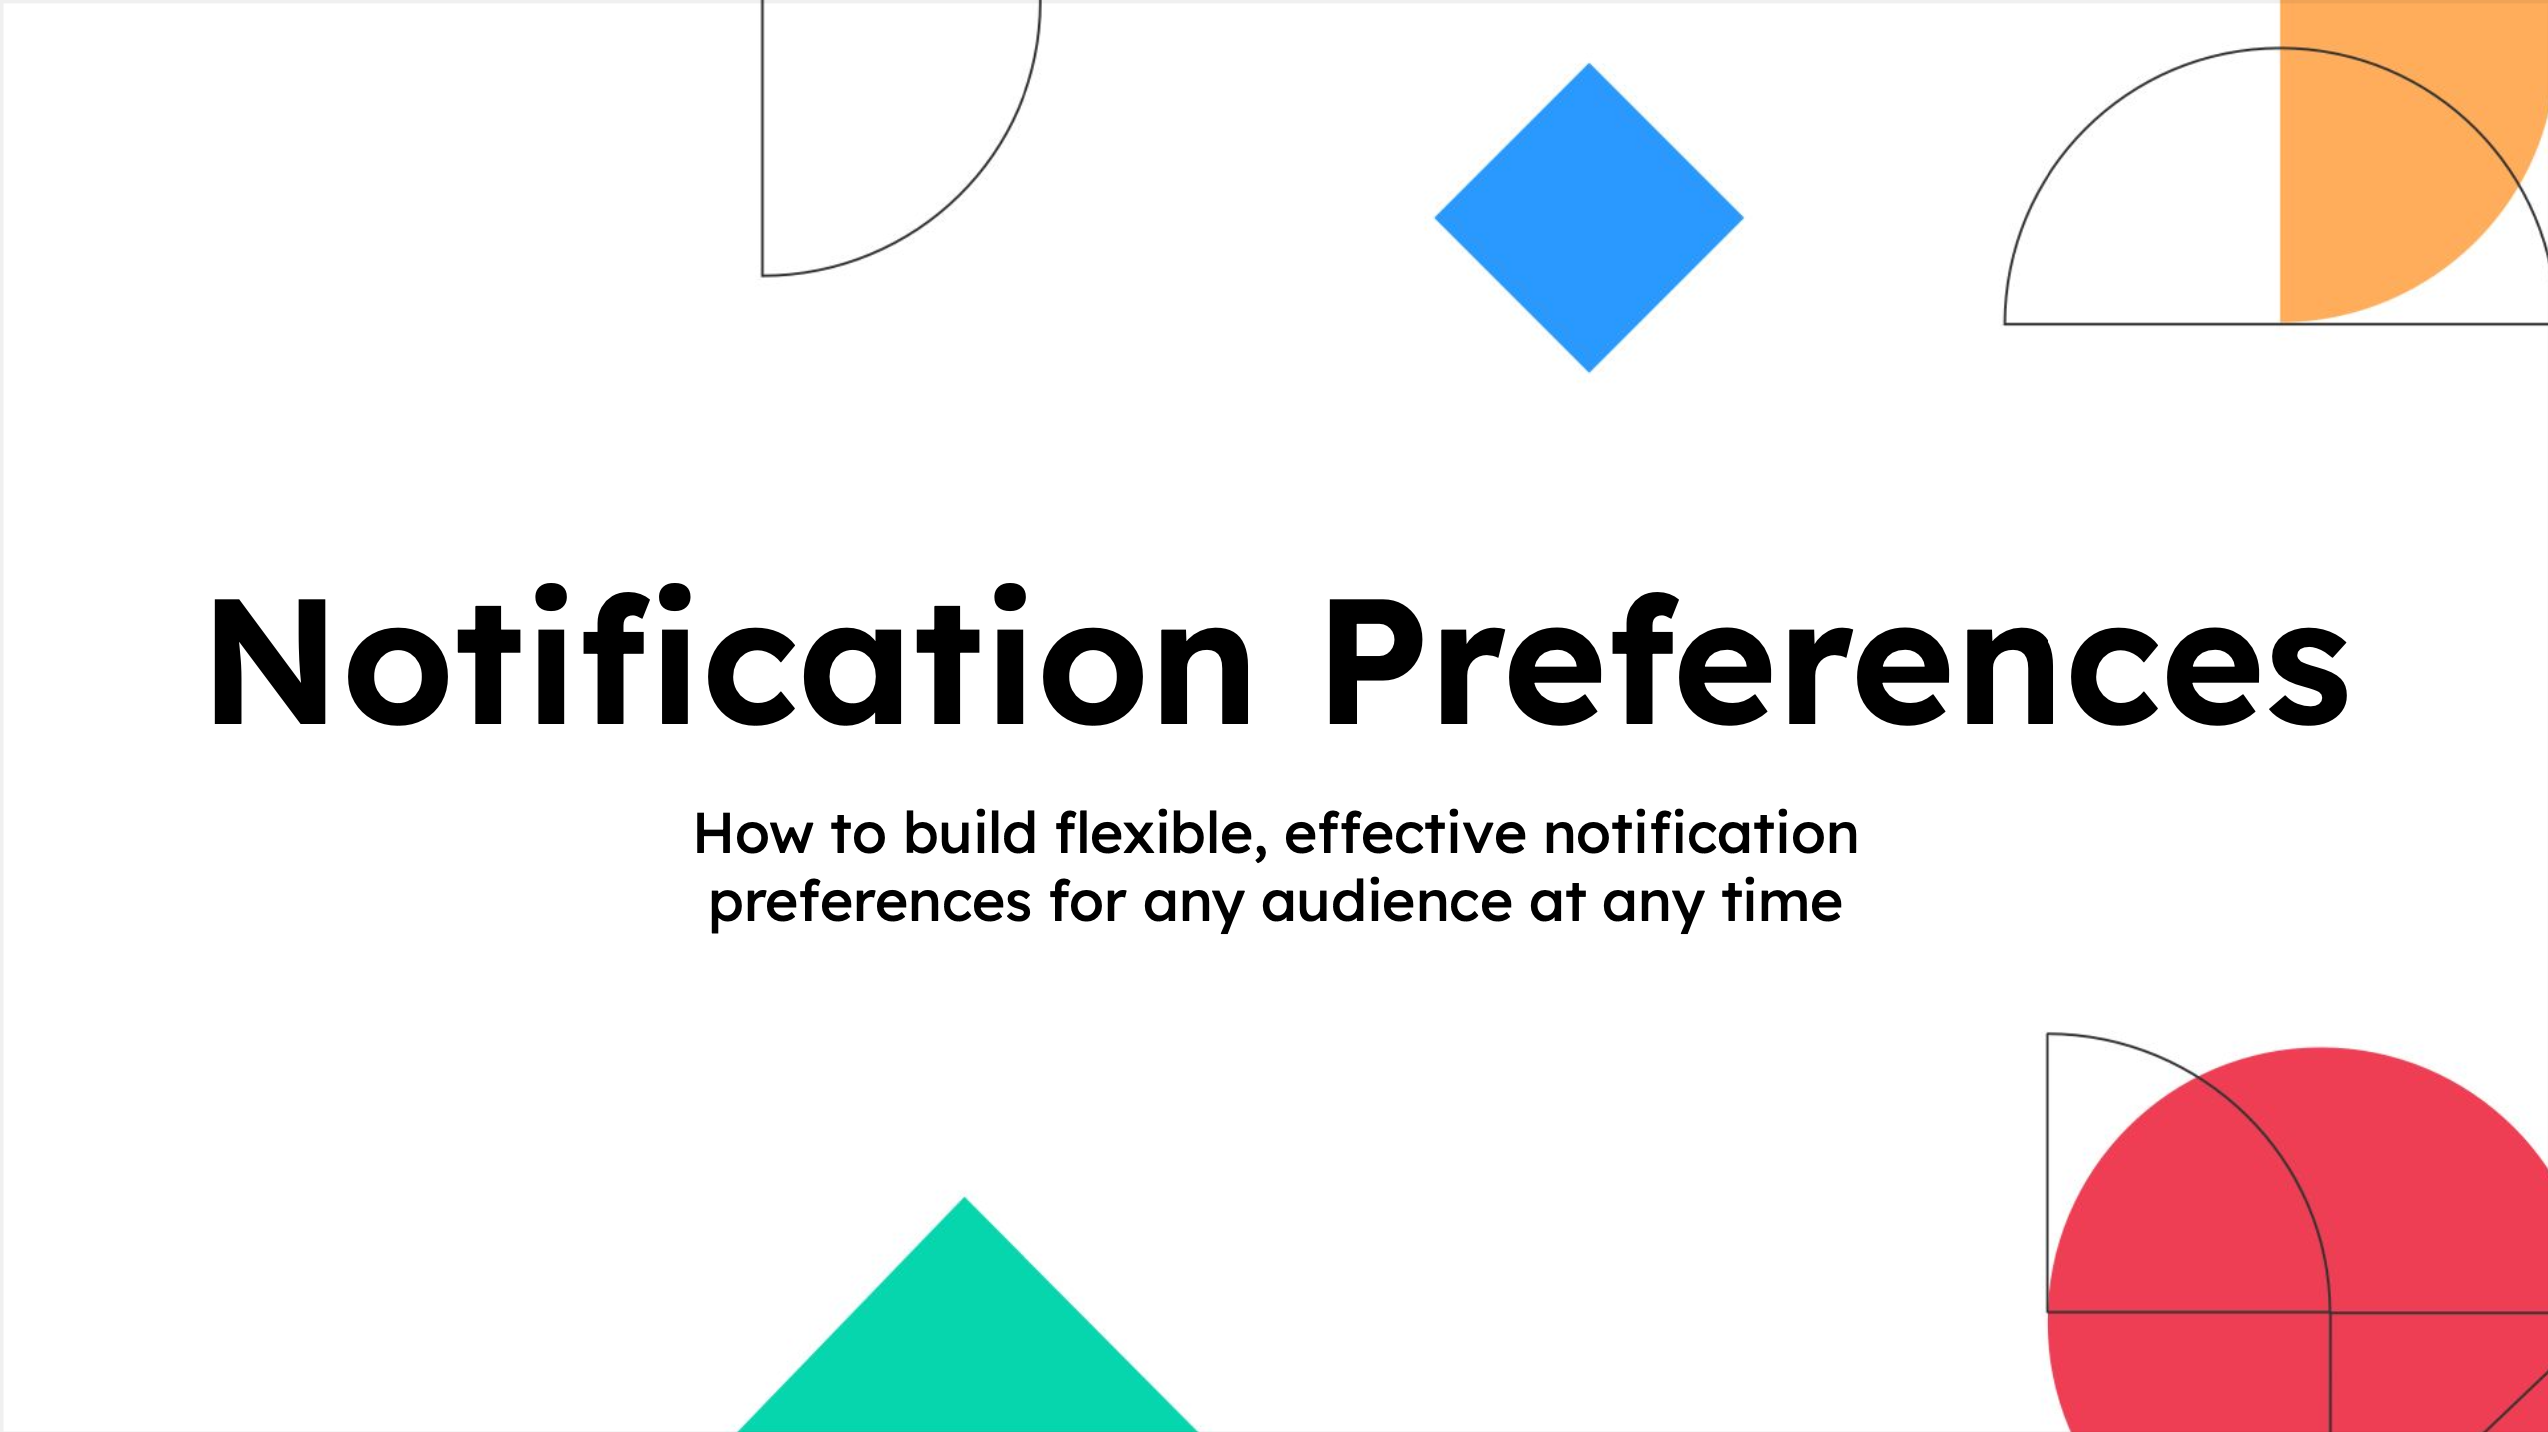 How to Build Flexible, Effective Notification Preferences For Any Audience, at Any Time